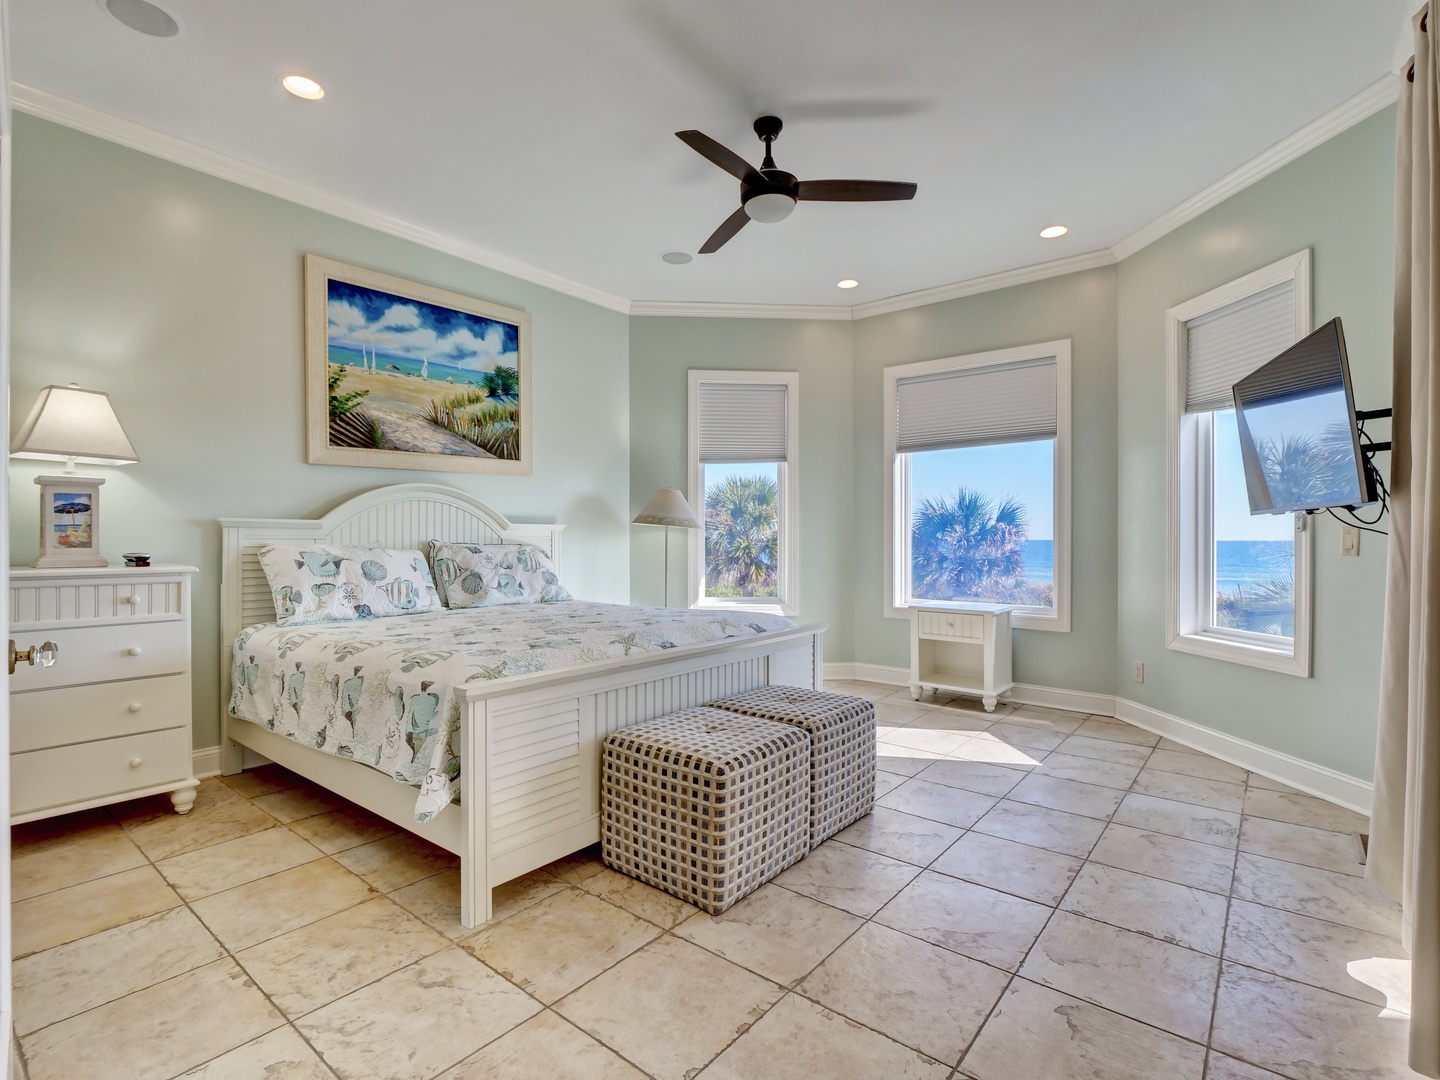 Bedroom with a king-sized bed, flat-screen TV, jack and jill bathroom, and beautiful ocean views